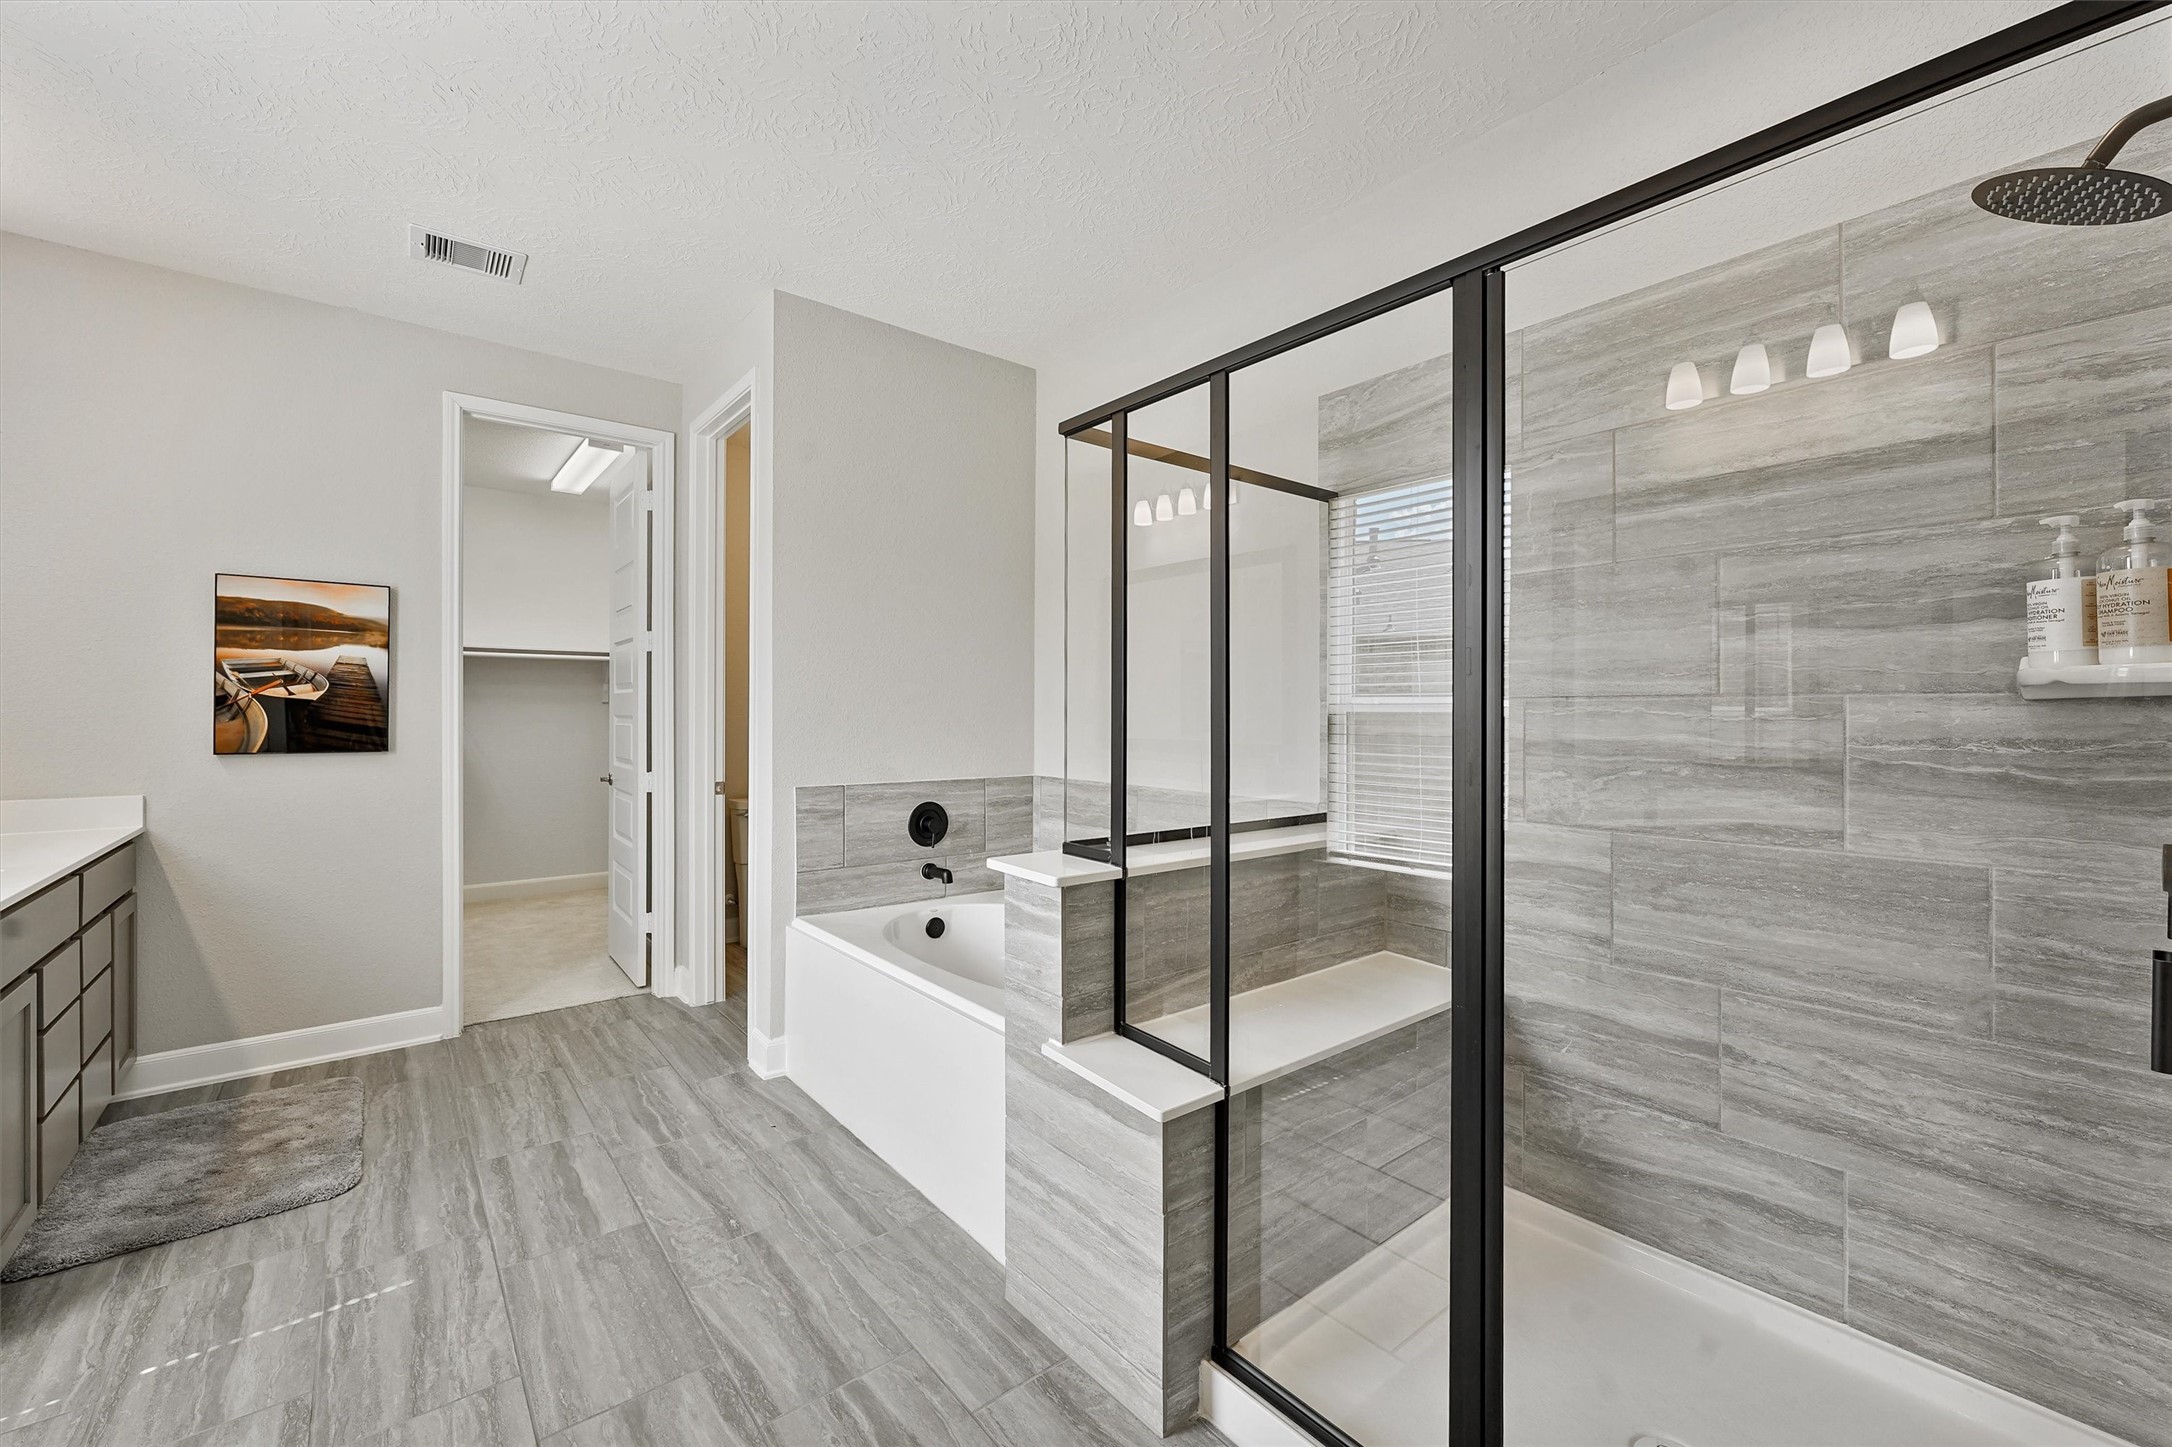 Separate shower and soak tub.